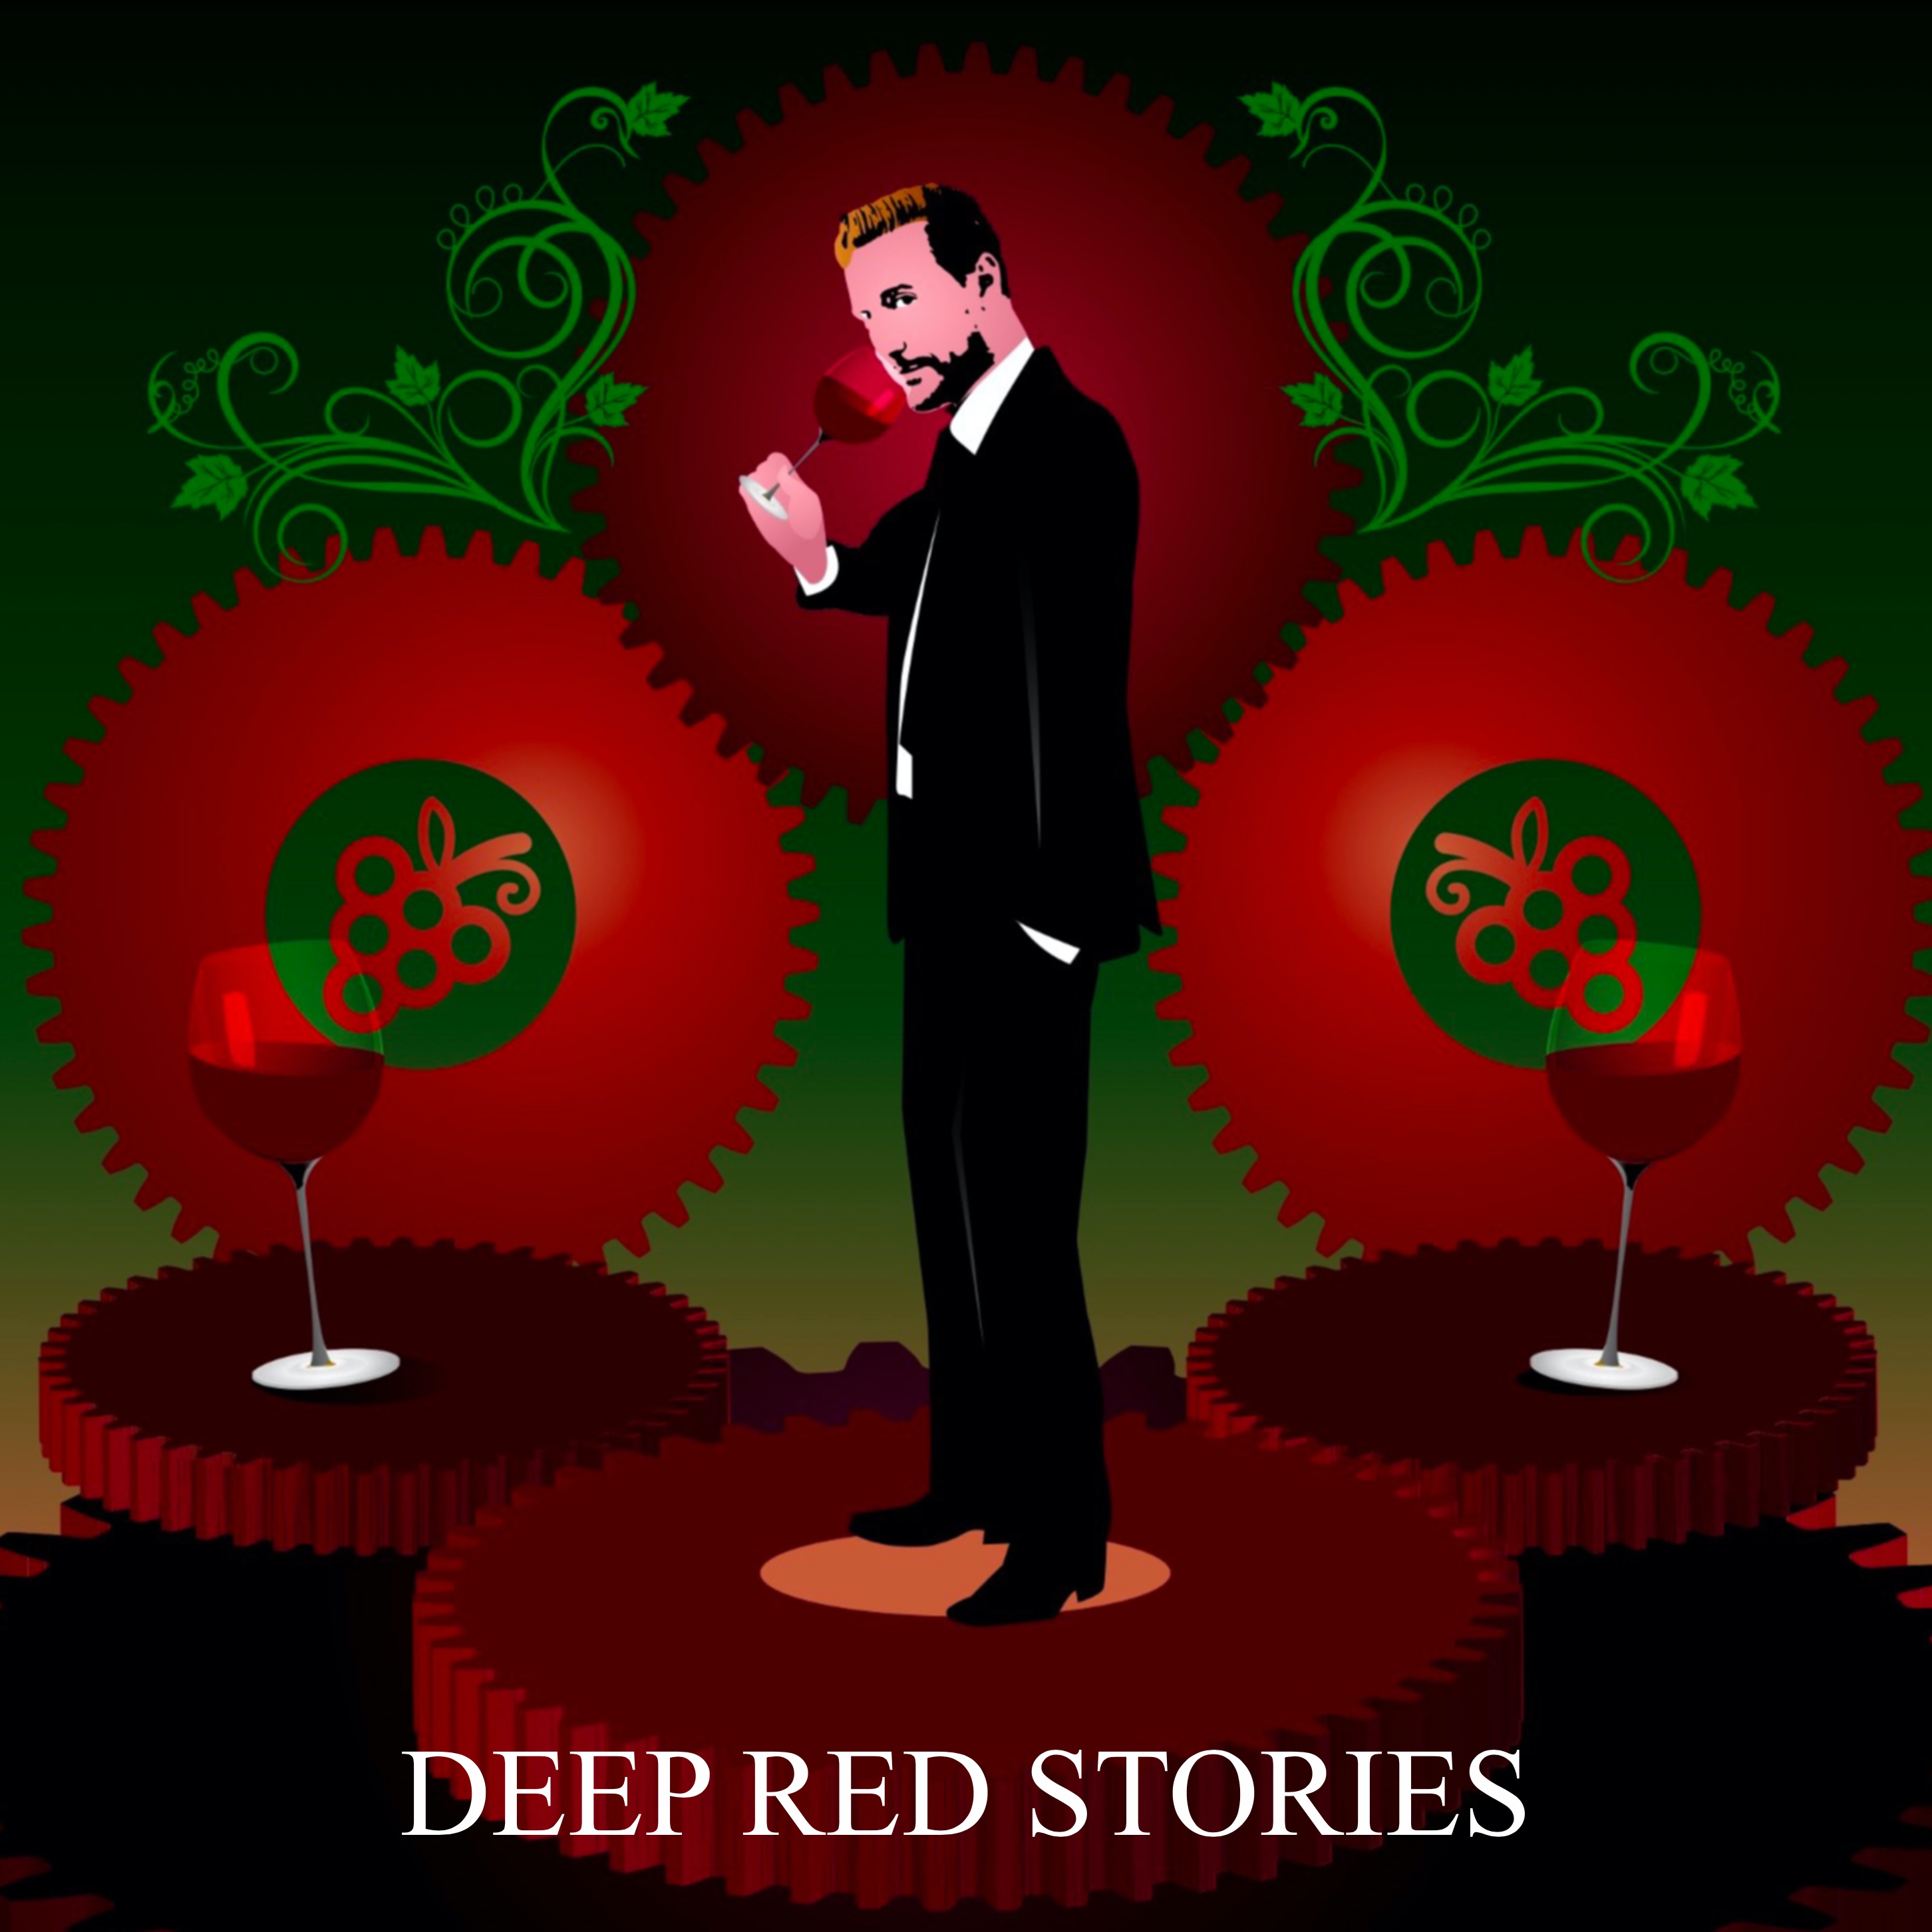 DEEP RED STORIES